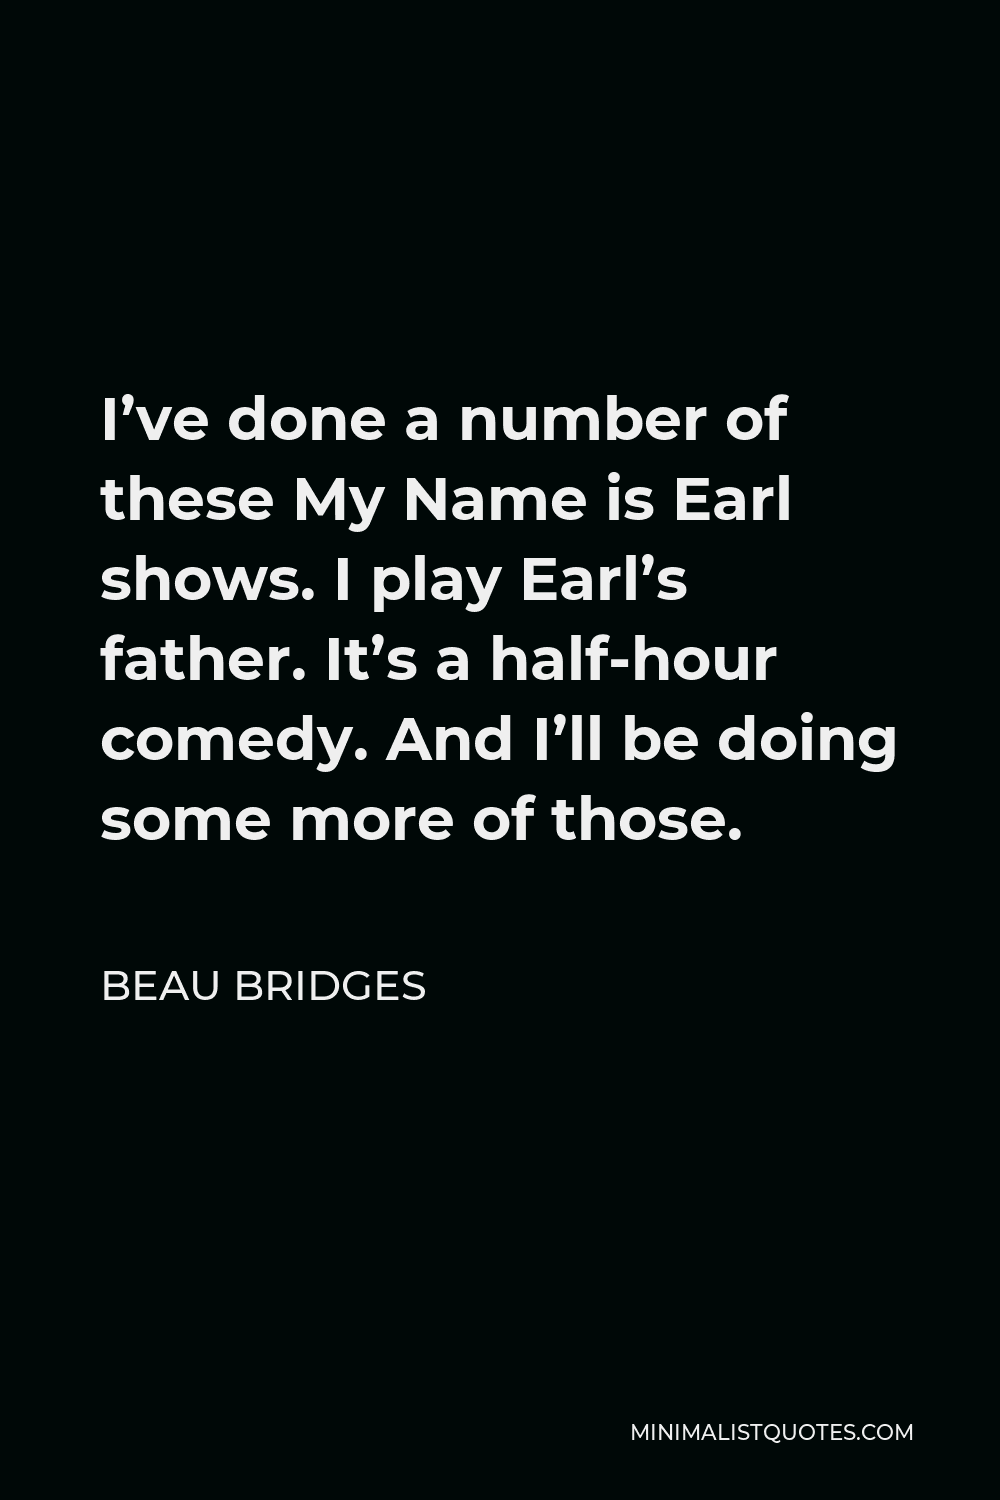 Beau Bridges Quote - I’ve done a number of these My Name is Earl shows. I play Earl’s father. It’s a half-hour comedy. And I’ll be doing some more of those.